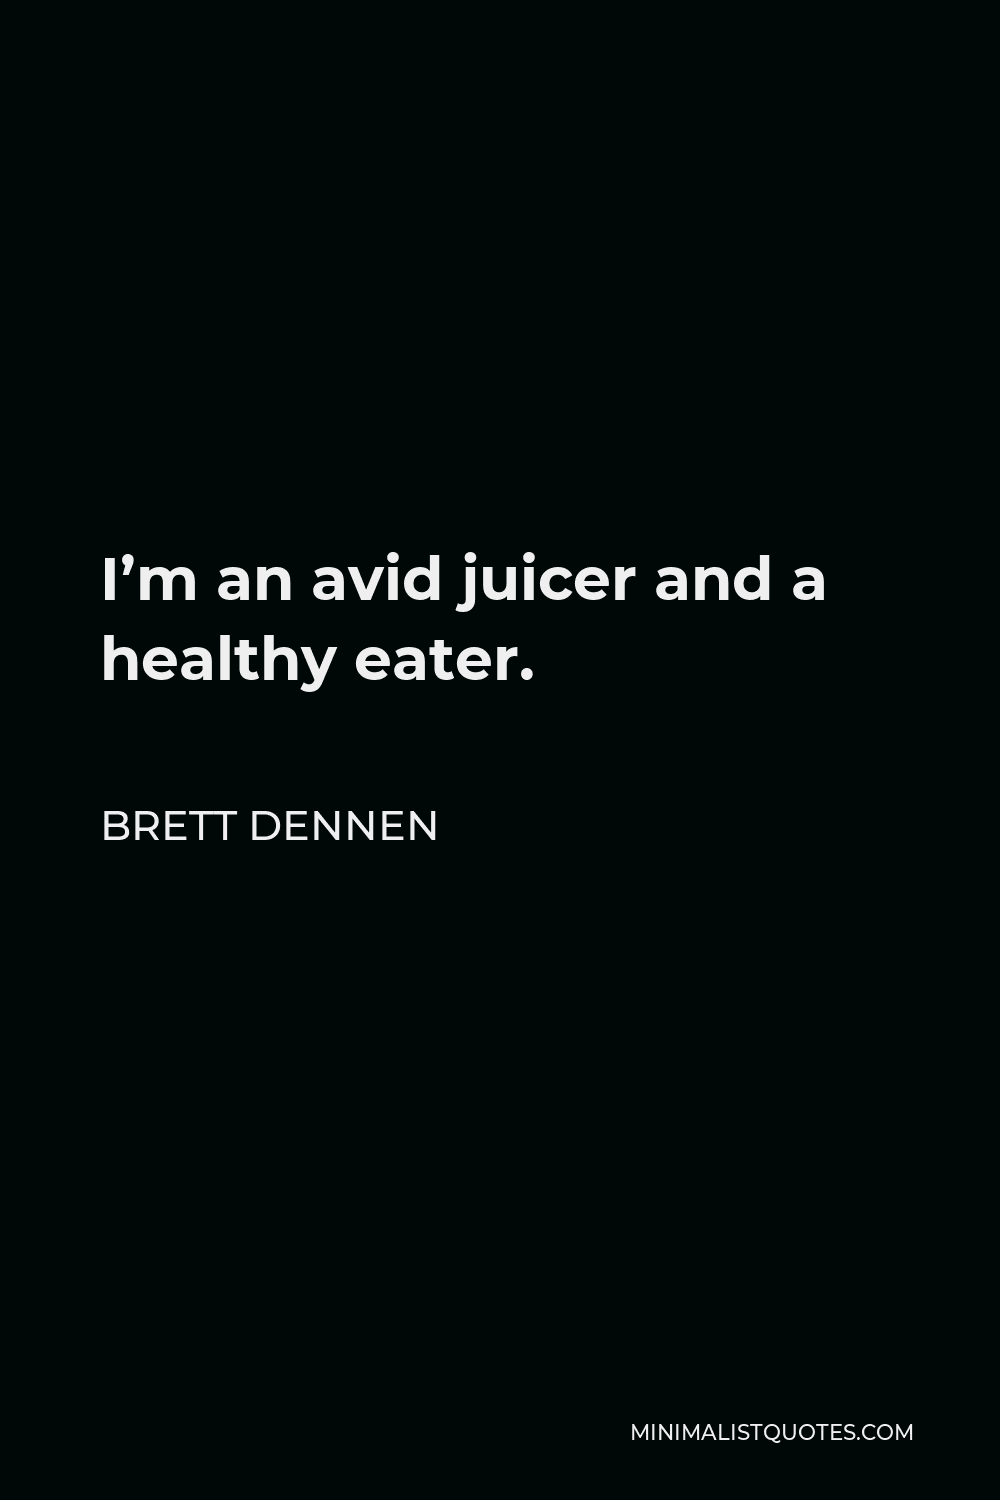 Brett Dennen Quote - I’m an avid juicer and a healthy eater.